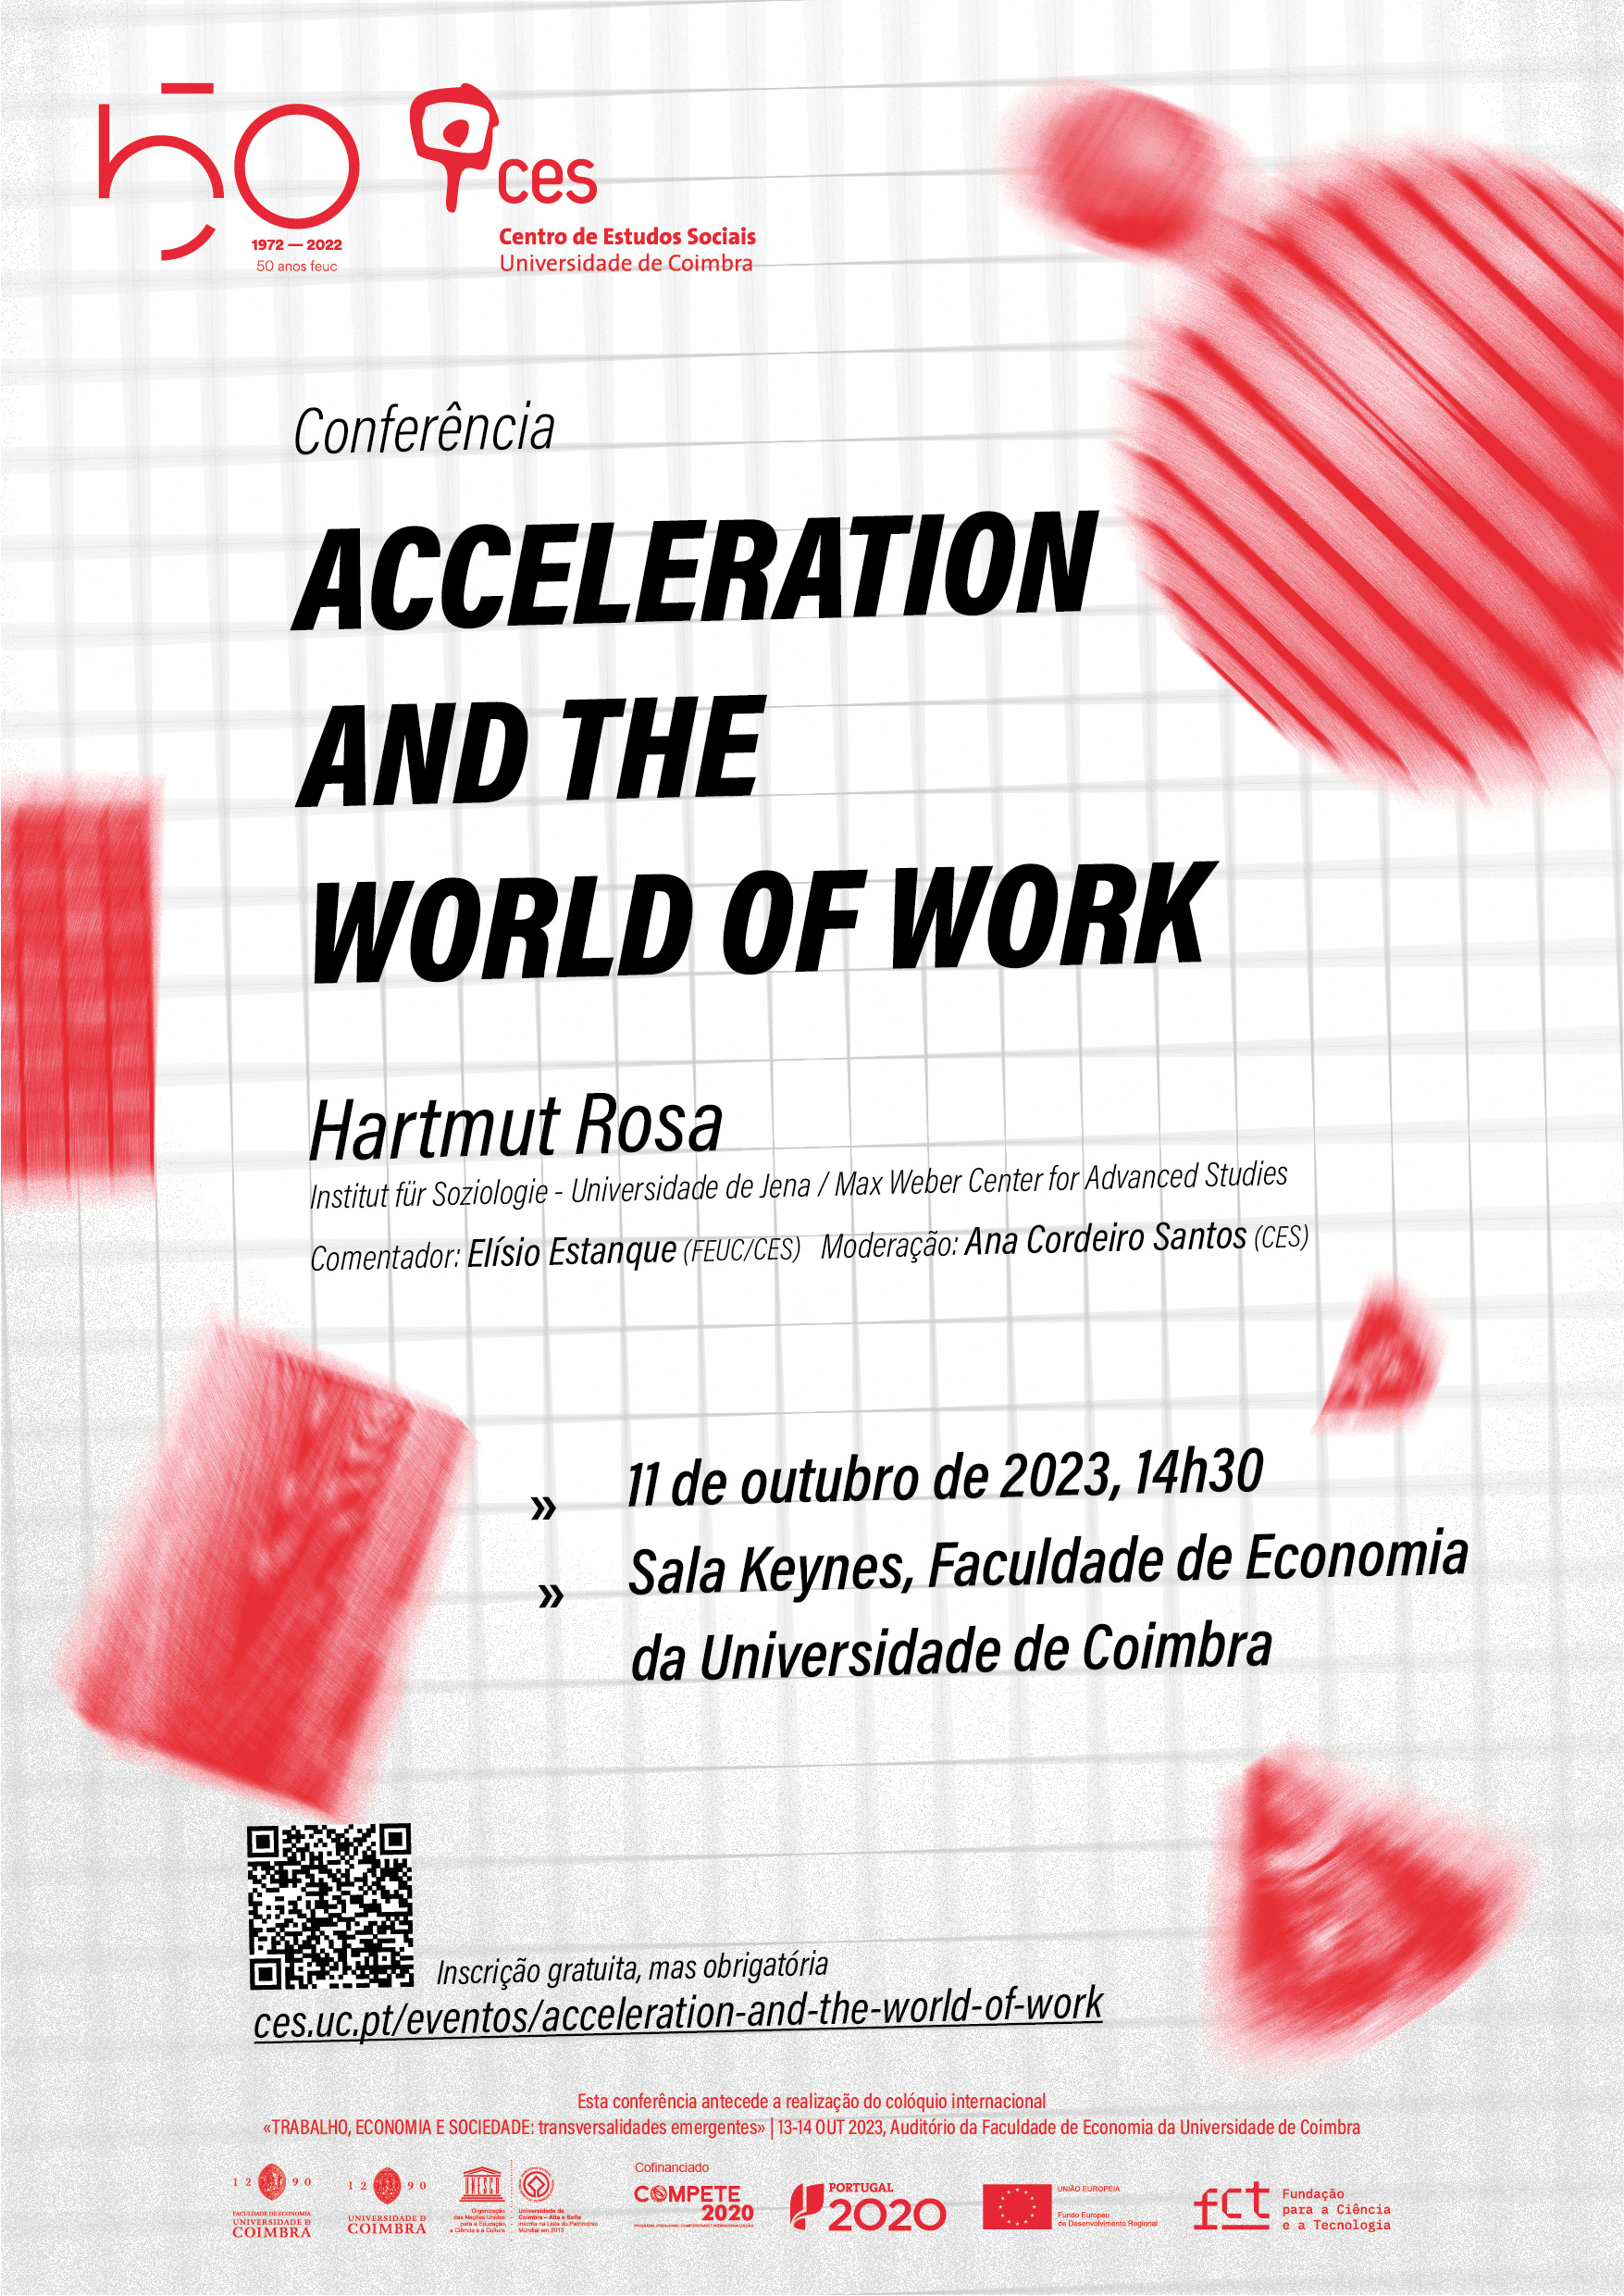 Acceleration and the World of Work<span id="edit_43491"><script>$(function() { $('#edit_43491').load( "/myces/user/editobj.php?tipo=evento&id=43491" ); });</script></span>